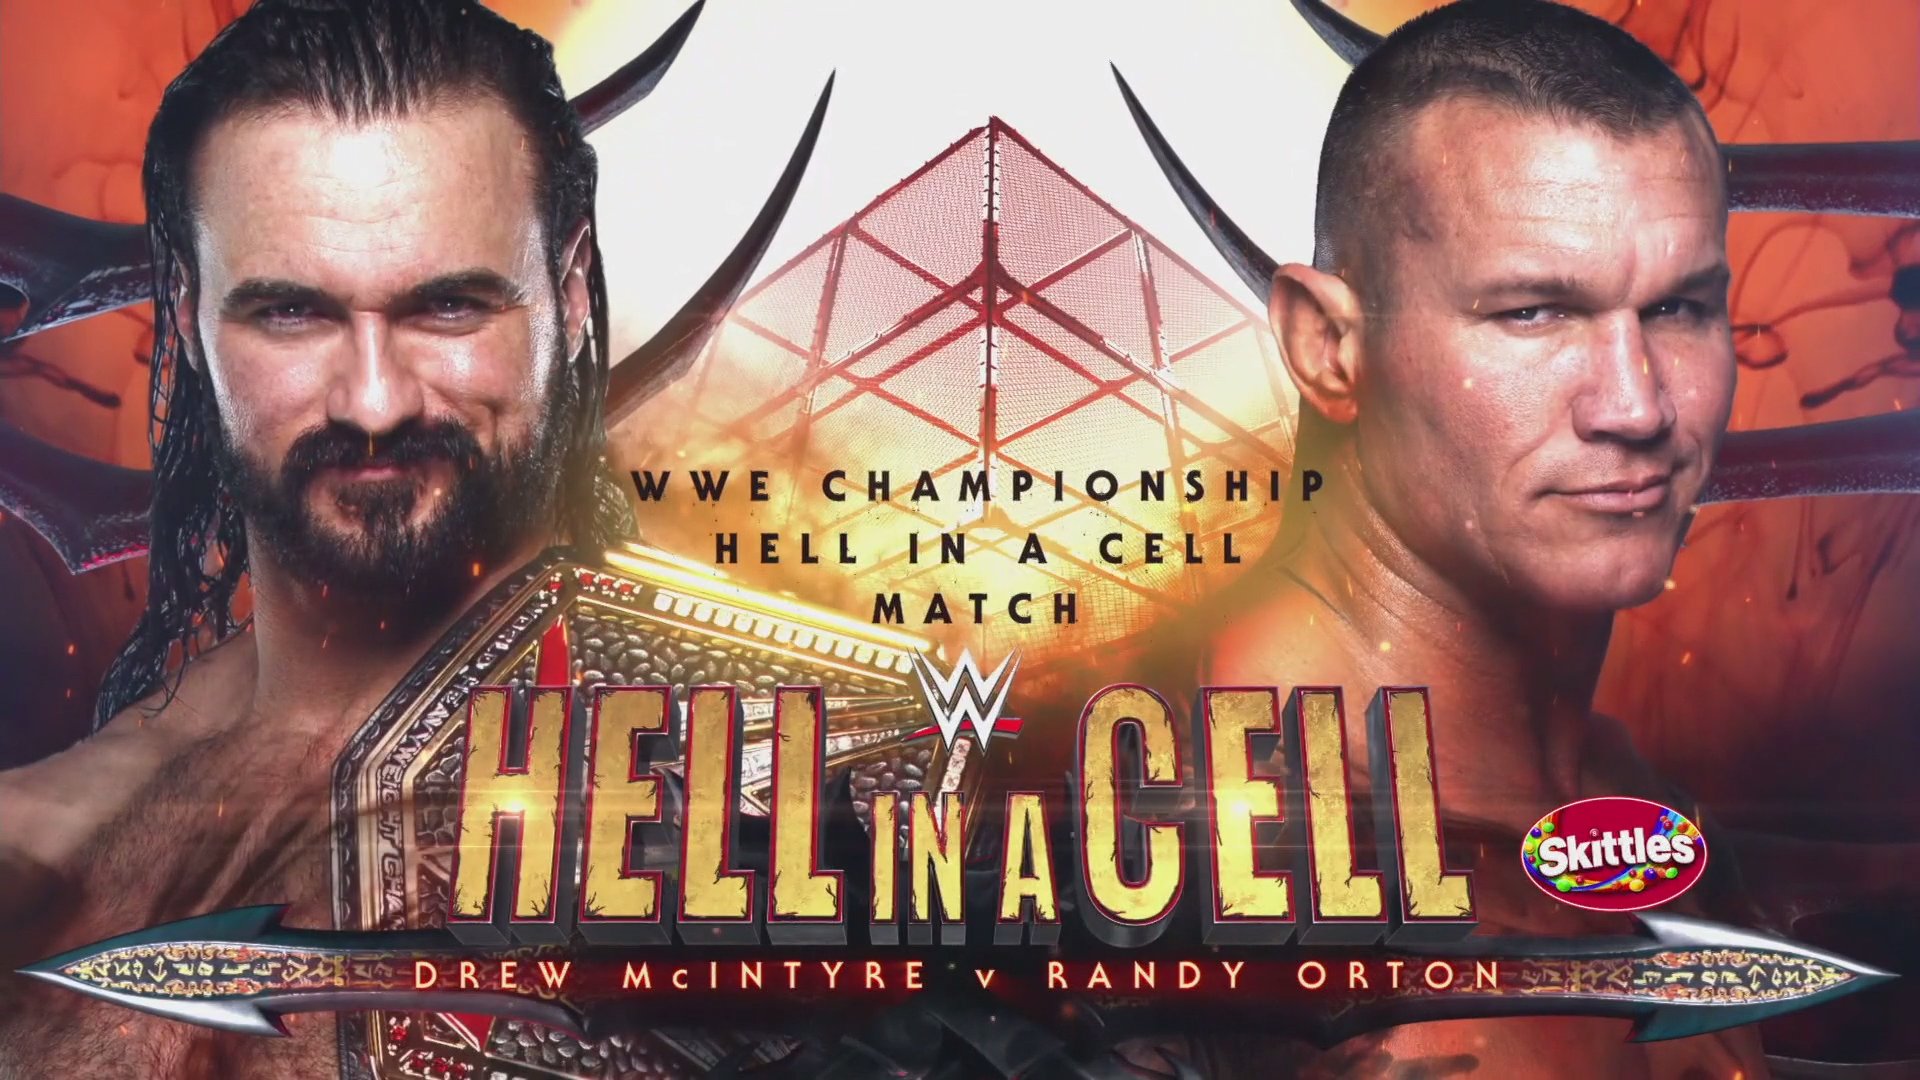 Drew McIntyre will defend his RAW Championship against Randy Orton inside H...